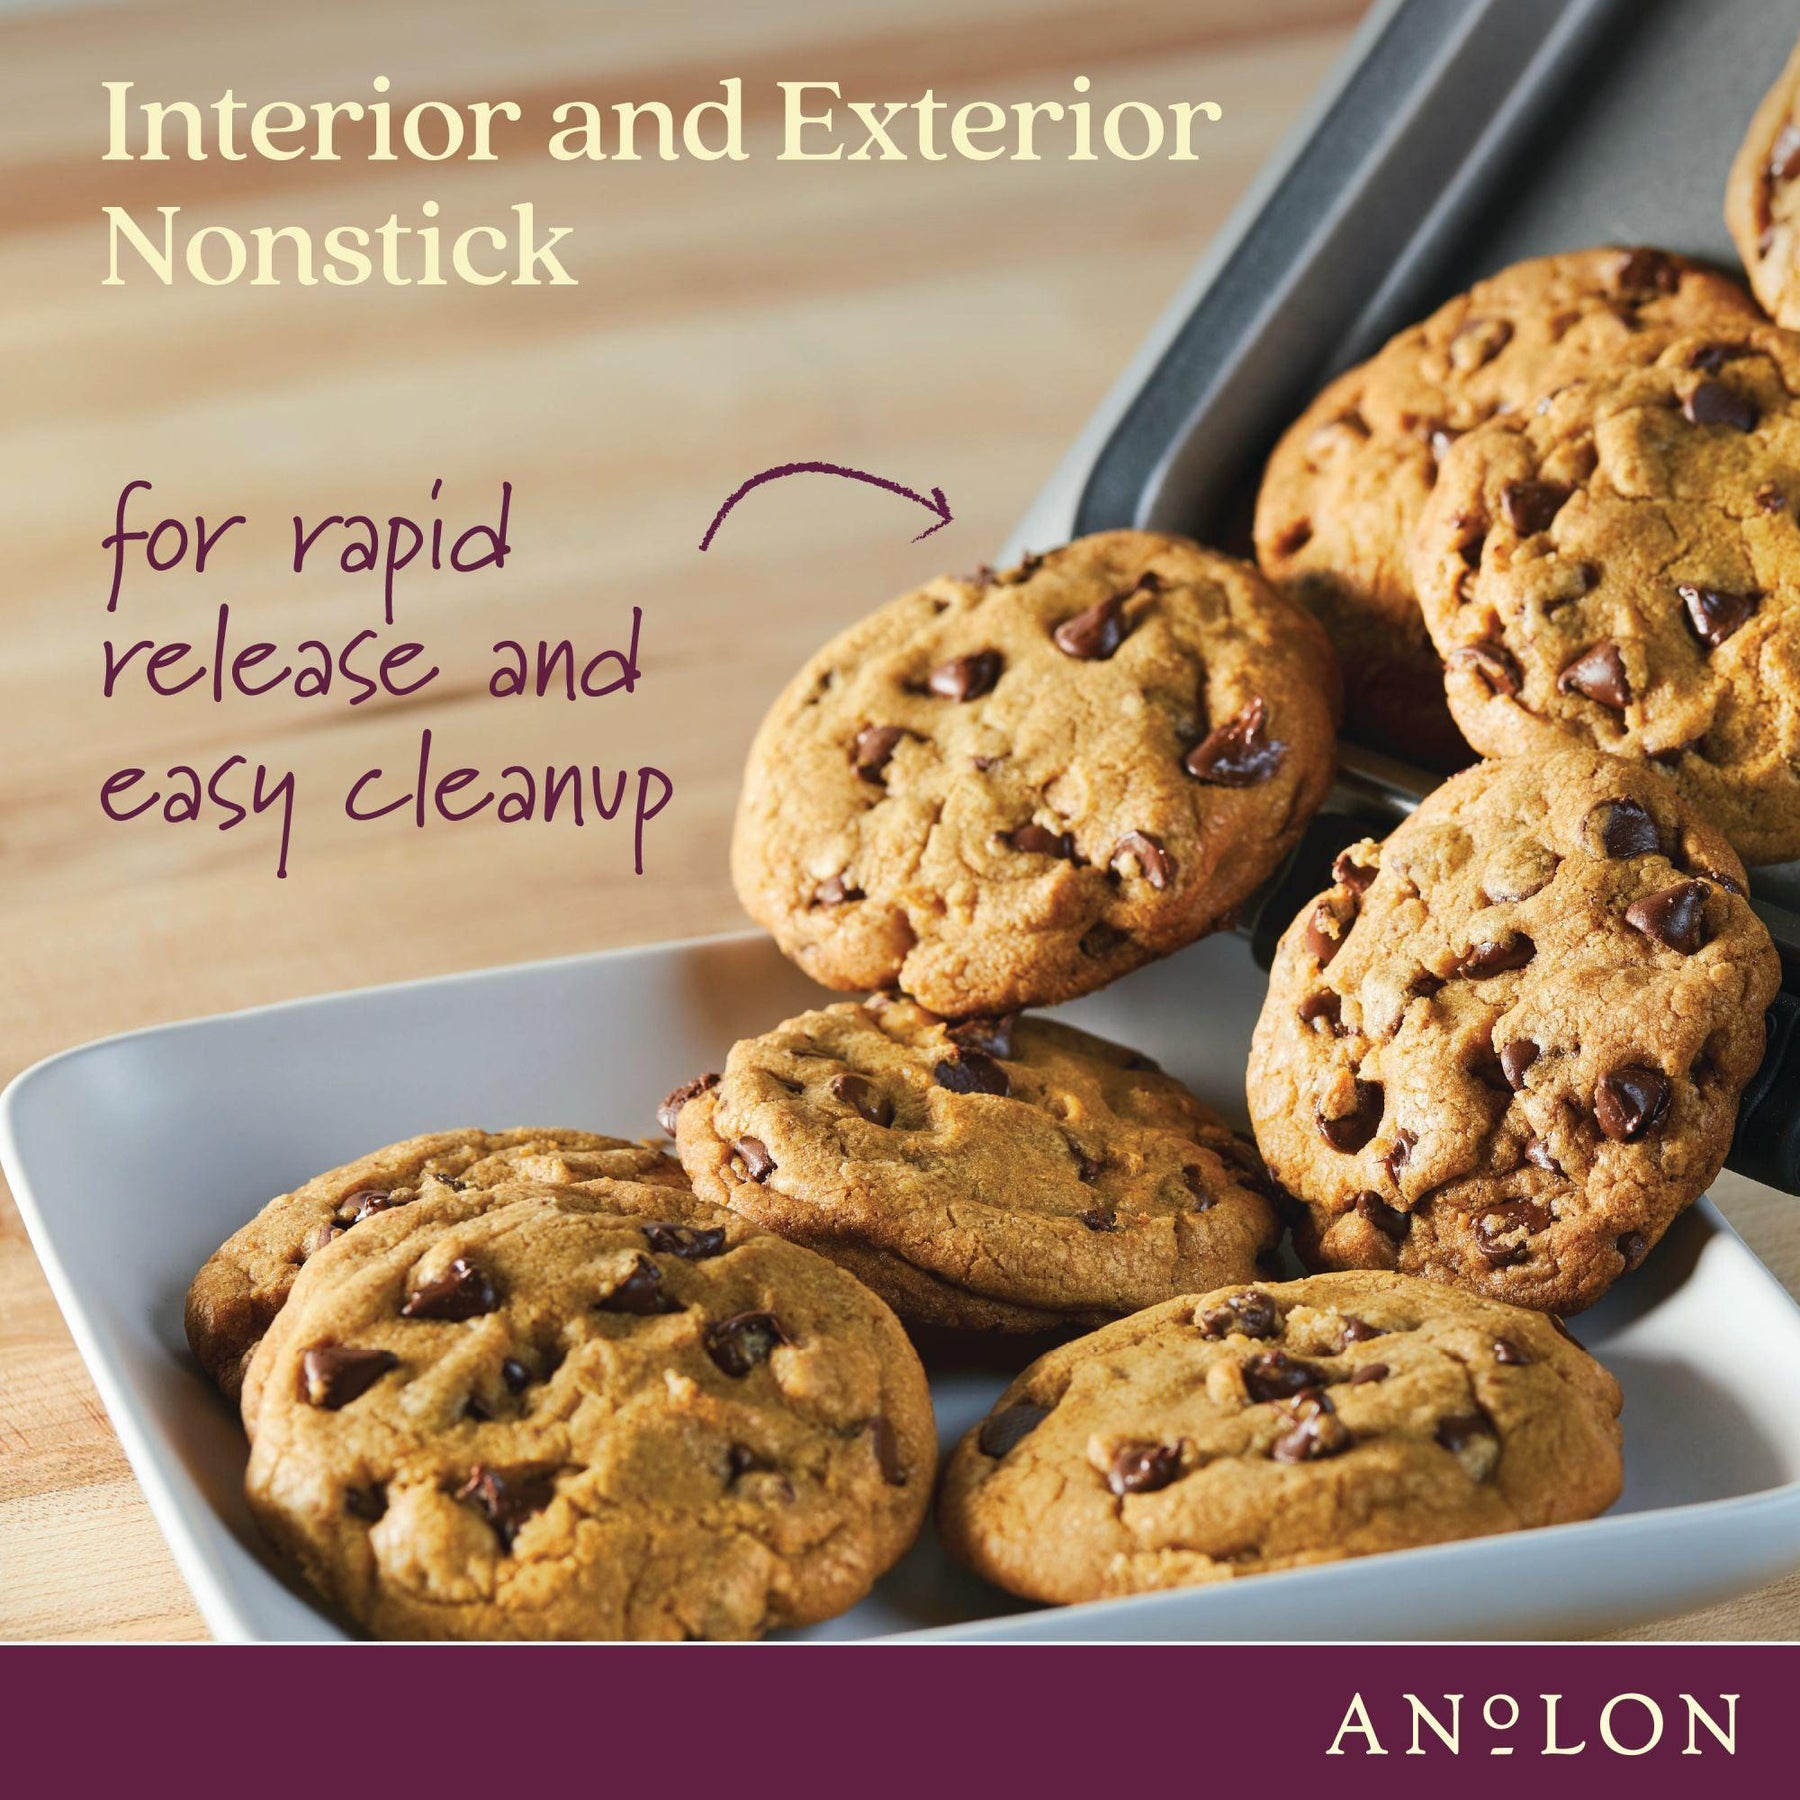 Cookie Sheet with Silicone Grips – Anolon